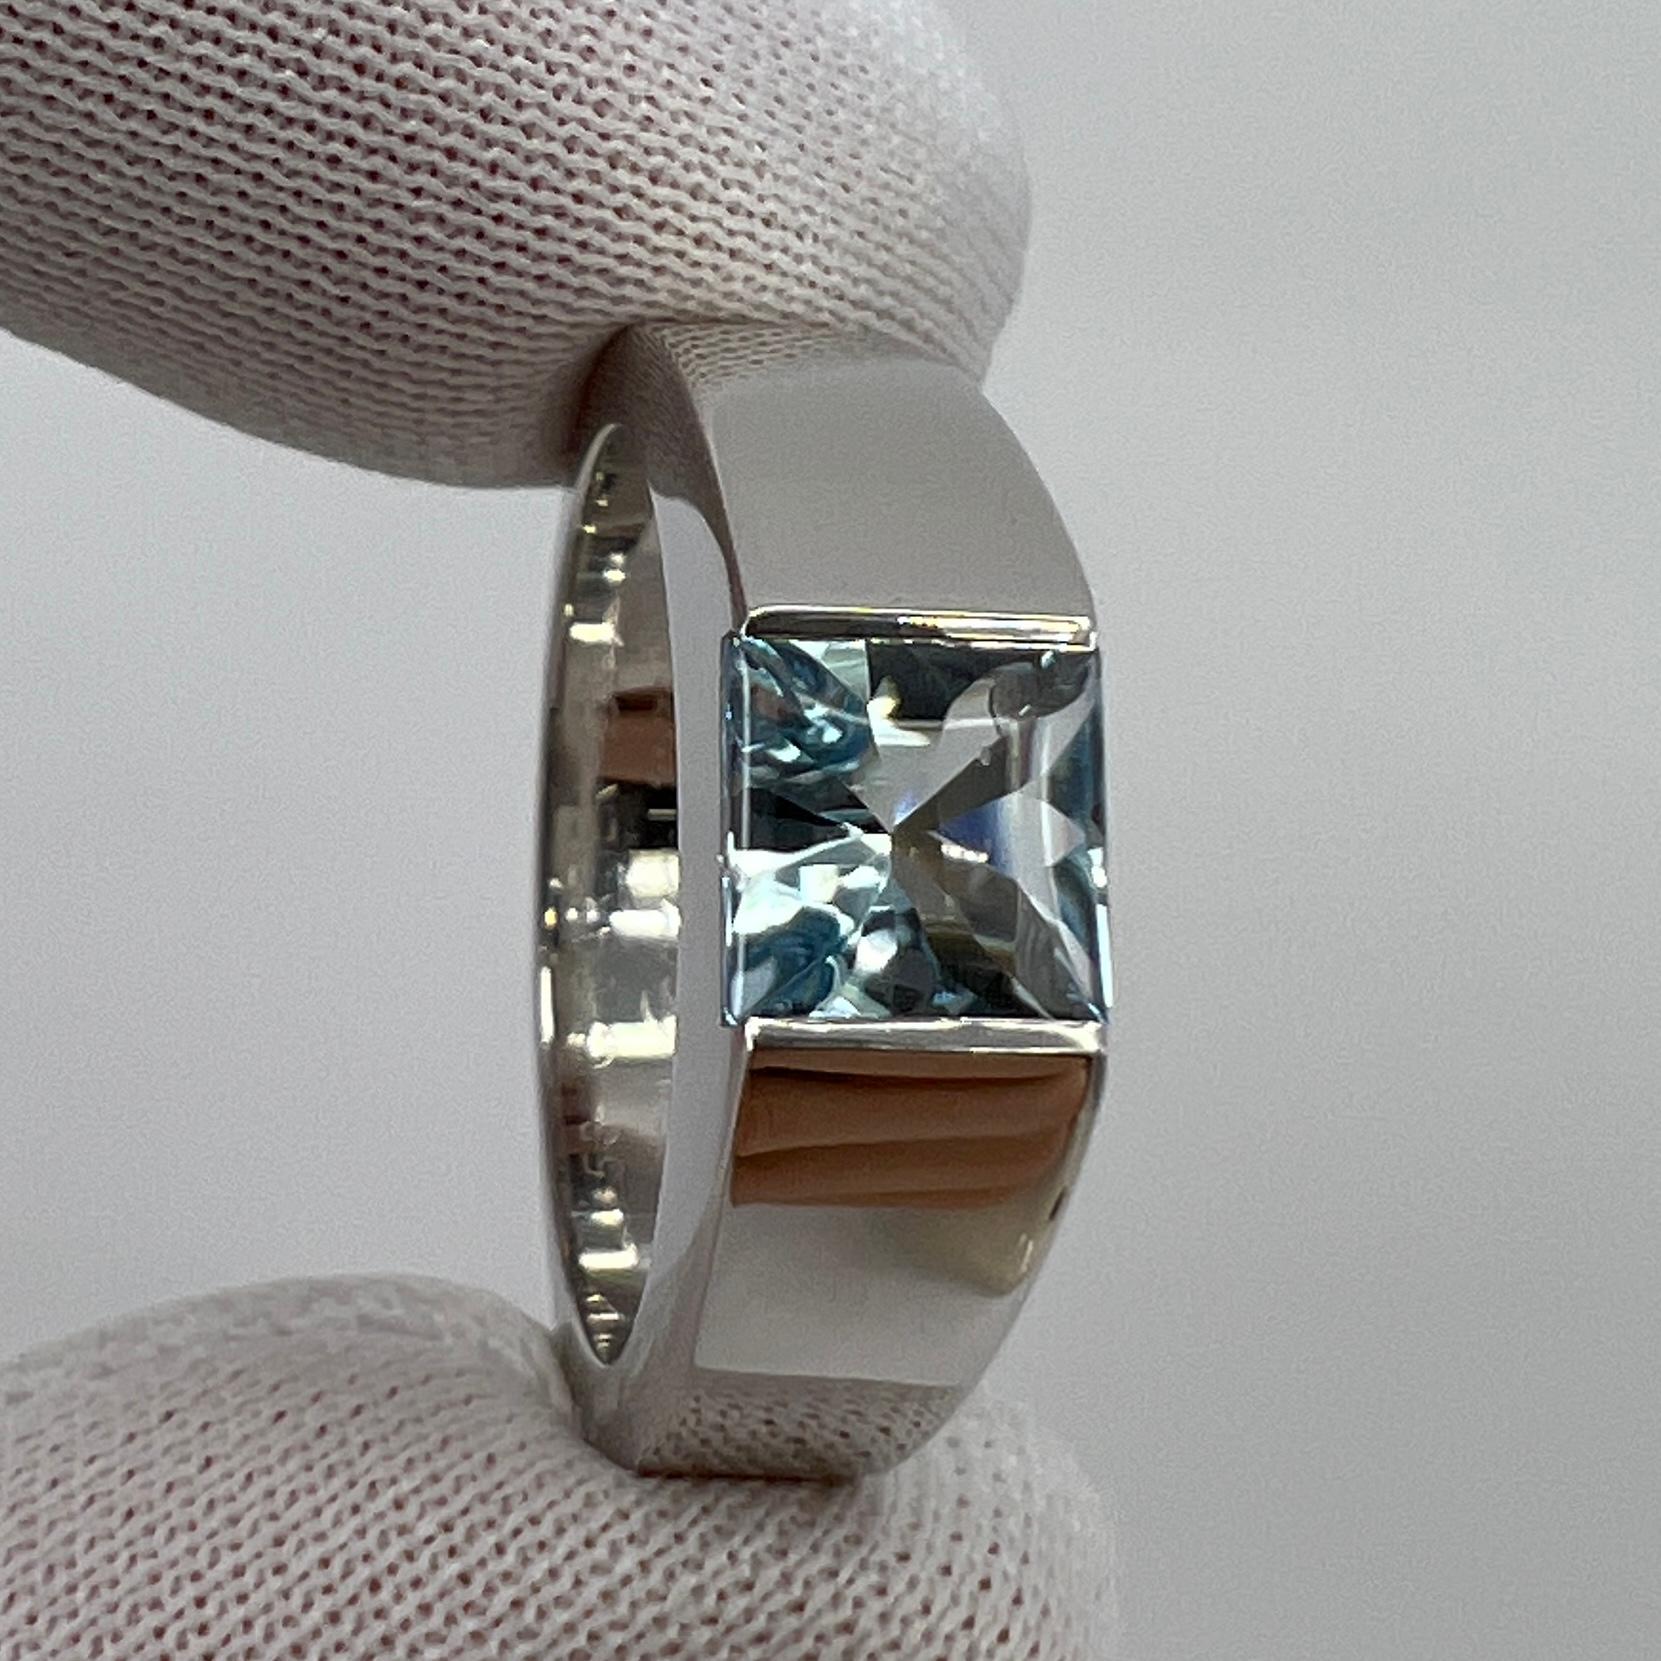 Vintage Cartier Fine Blue Aquamarine 18 Karat White Gold Tank Ring.

Stunning white gold ring with a 6mm tension set fine blue aquamarine. 
Fine jewellery houses like Cartier only use the finest of gemstones and this aquamarine is no exception. A